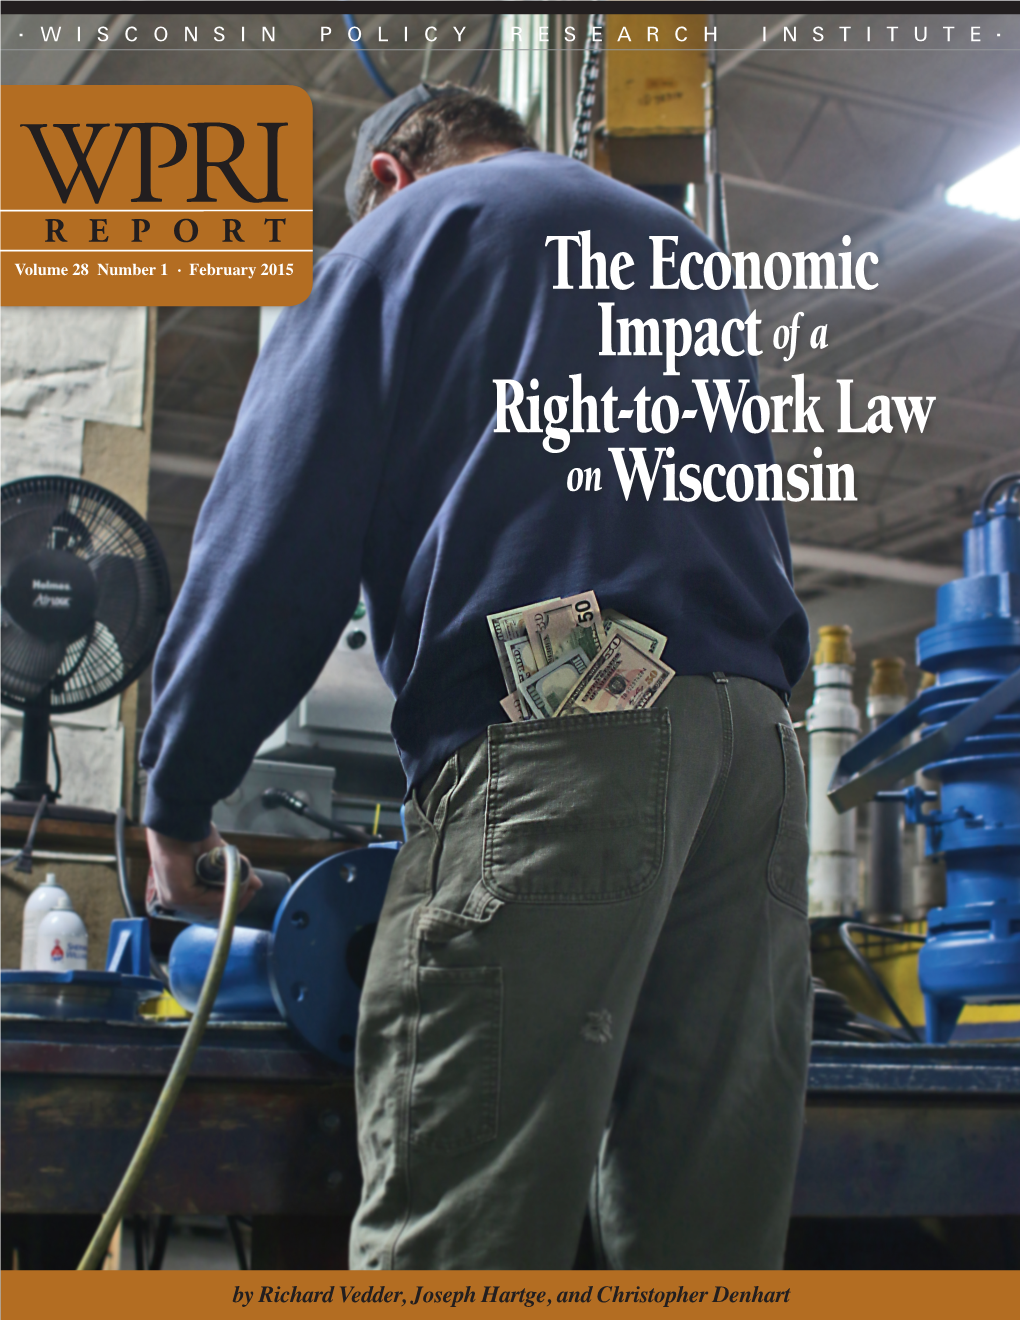 The Economic Impact of a Right-To-Work Law on Wisconsin